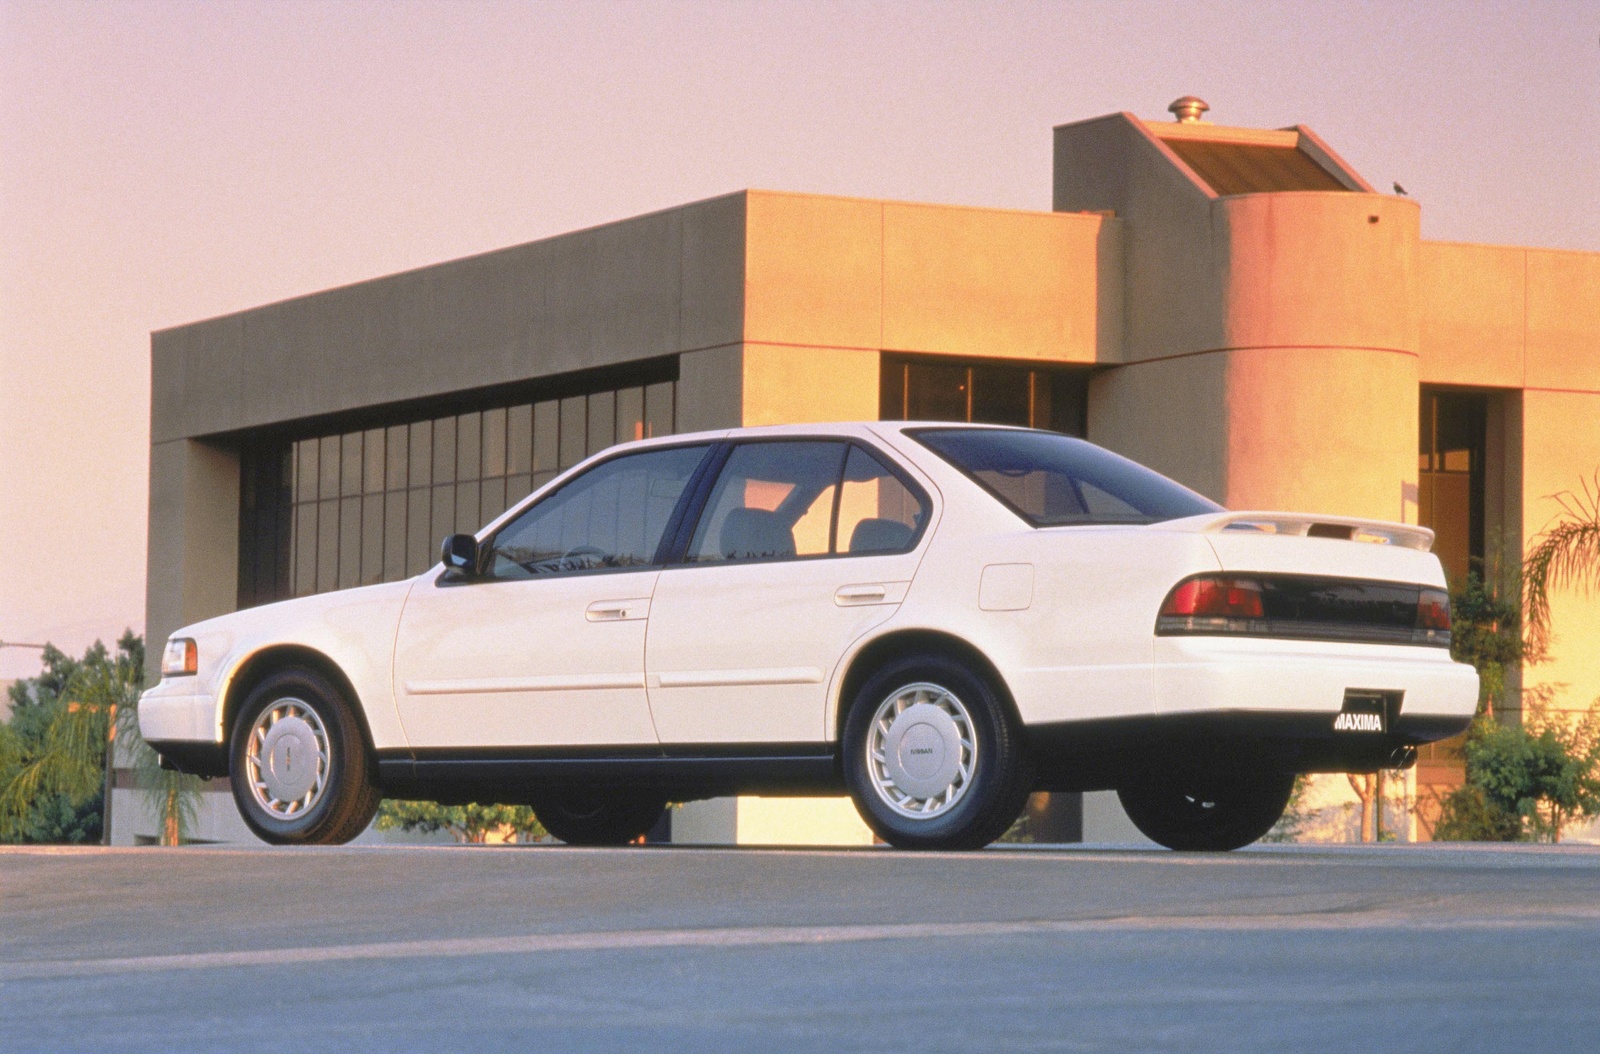 Picture of 1990 nissan maxima #5